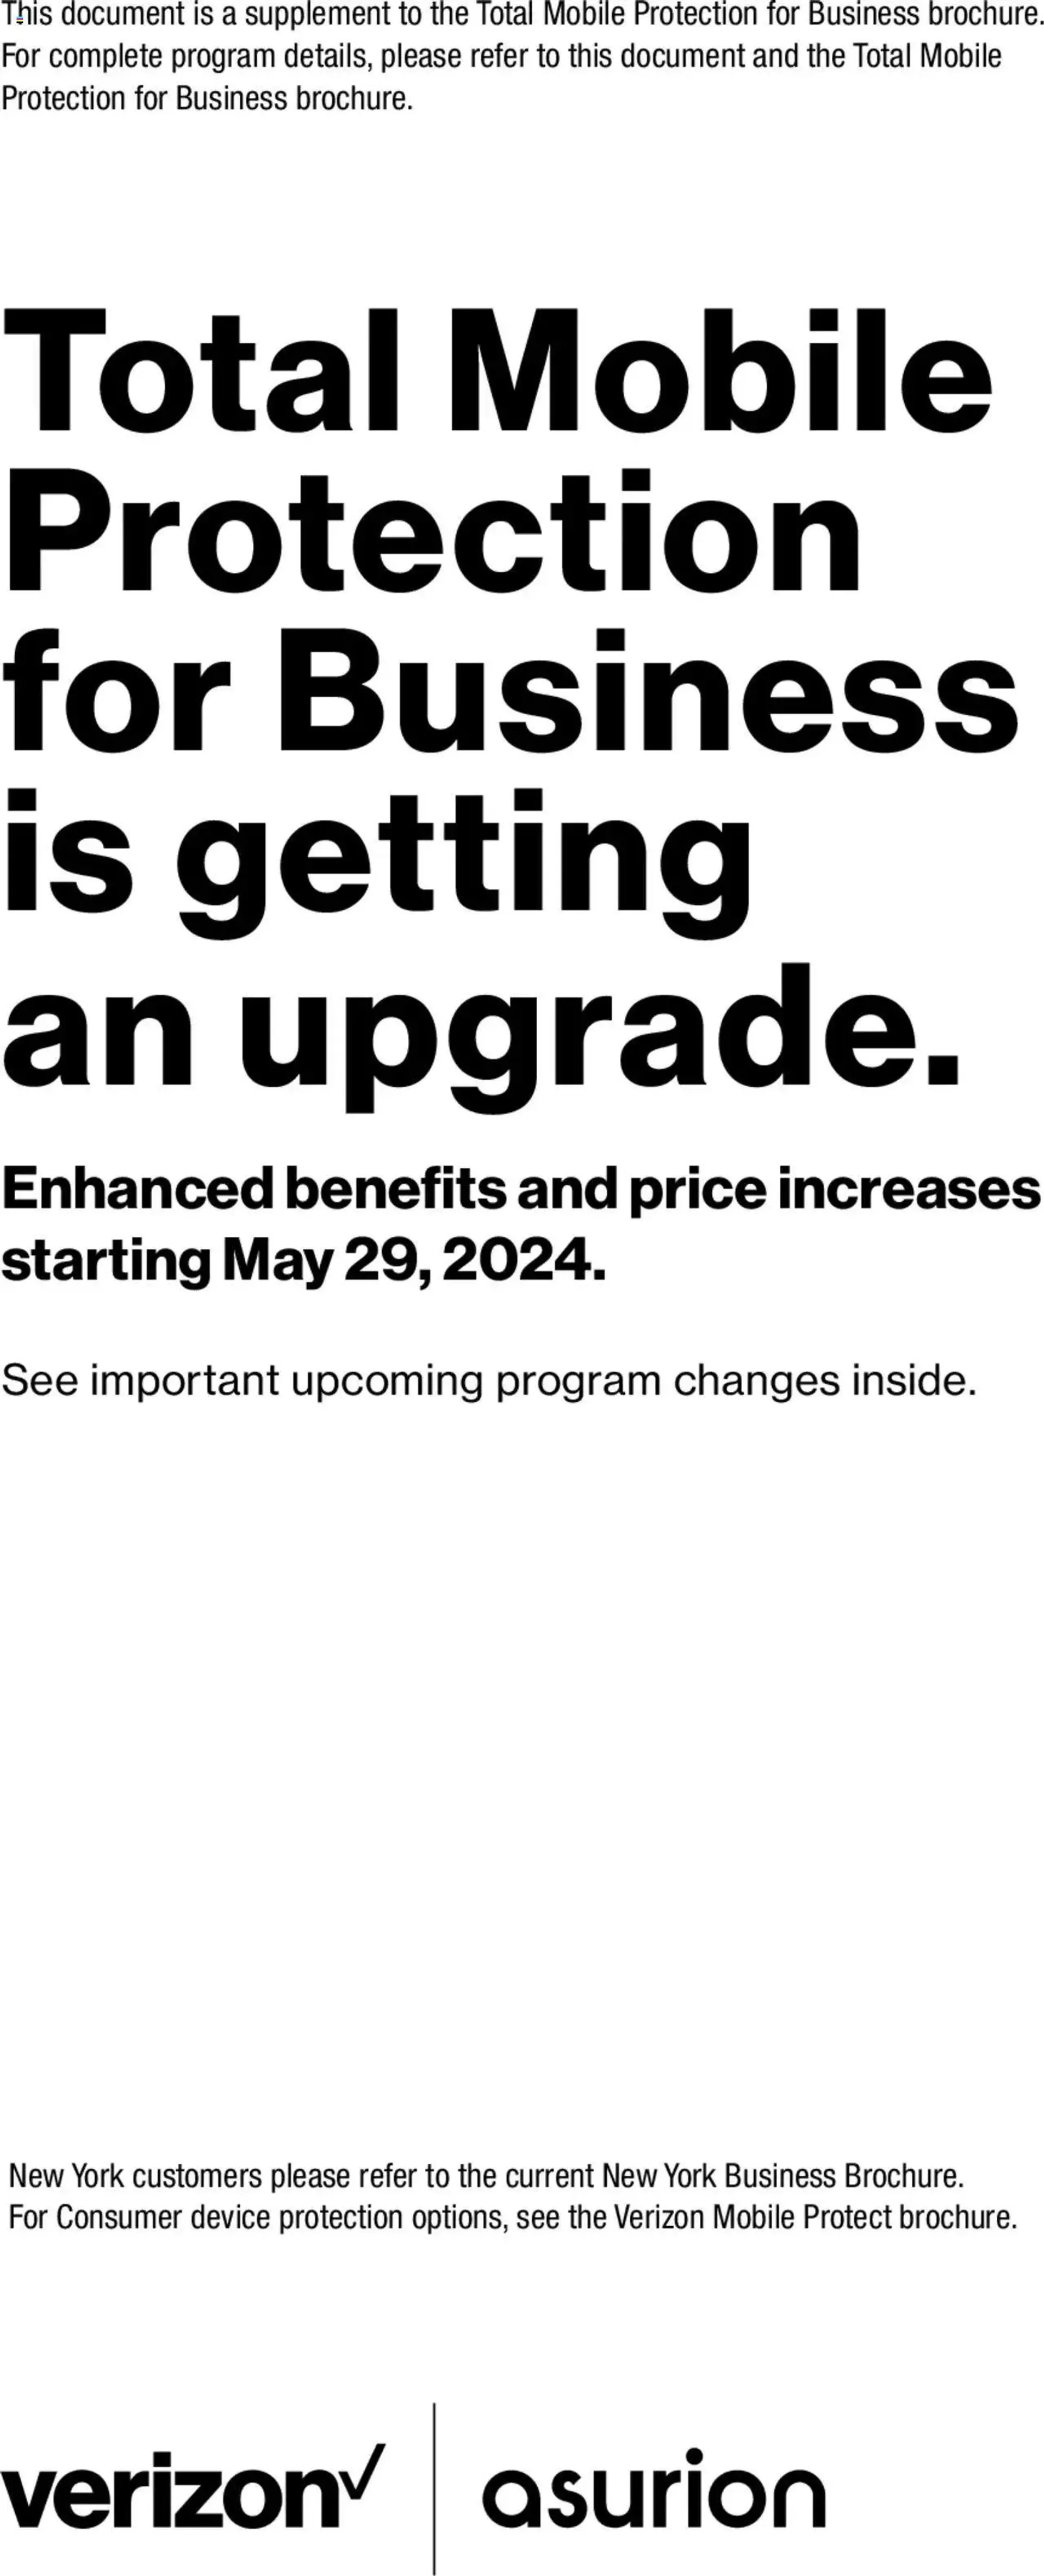 Weekly ad Verizon - Total Mobile Protection for Business is Getting an Upgrade from February 15 to December 31 2024 - Page 